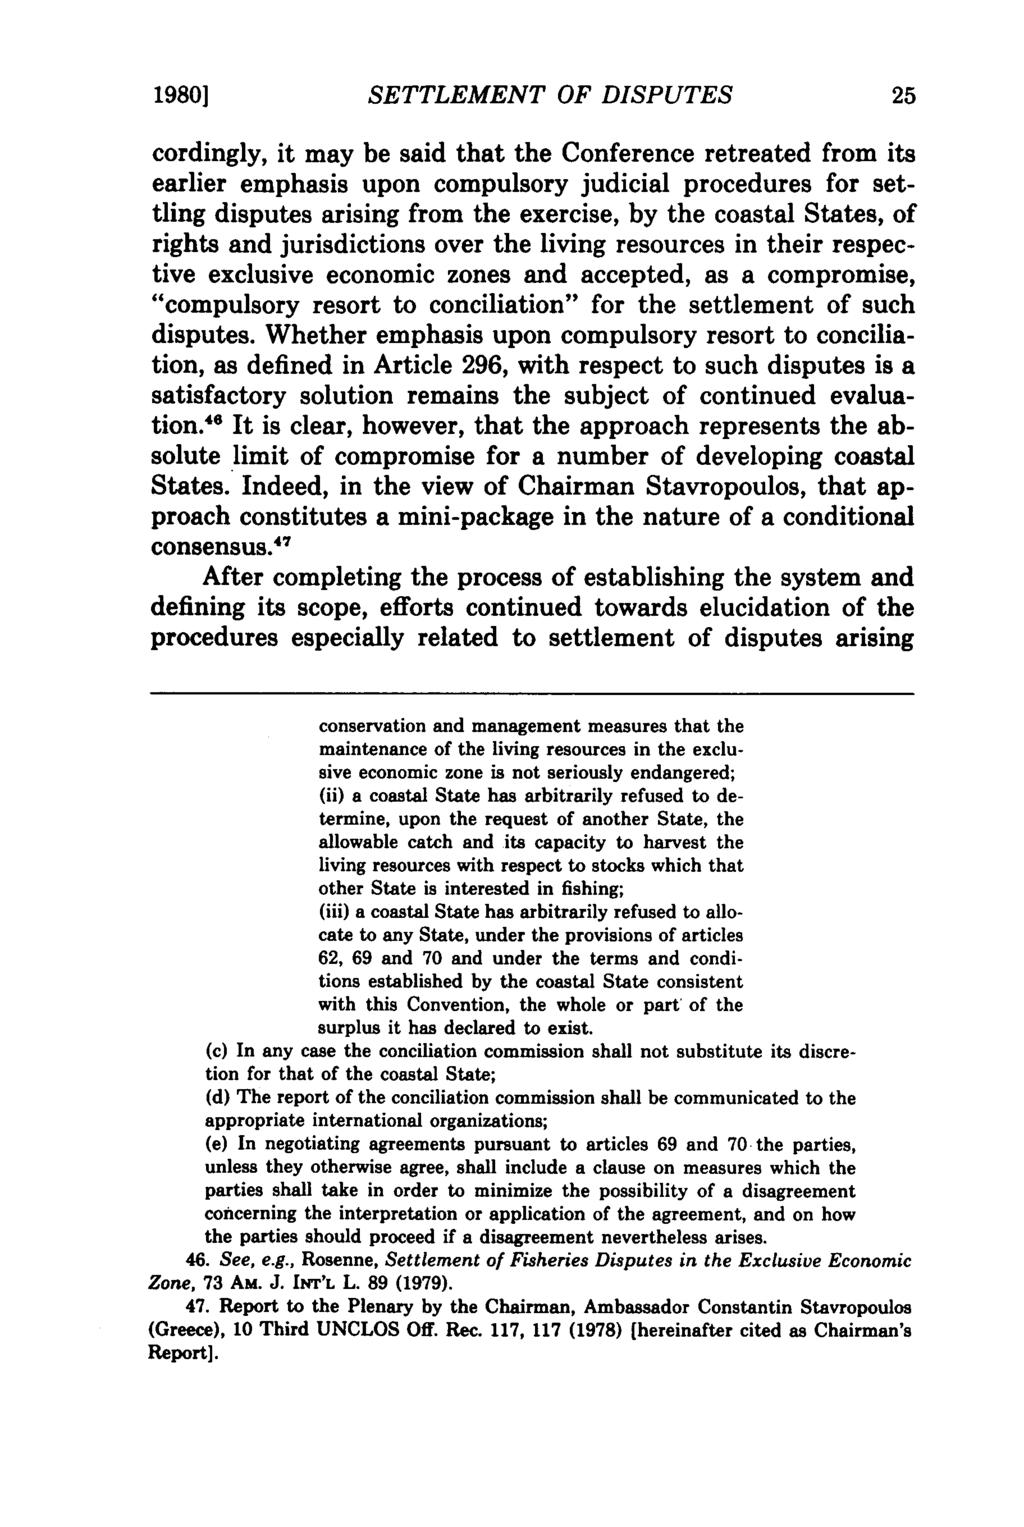 1980] SETTLEMENT OF DISPUTES cordingly, it may be said that the Conference retreated from its earlier emphasis upon compulsory judicial procedures for settling disputes arising from the exercise, by